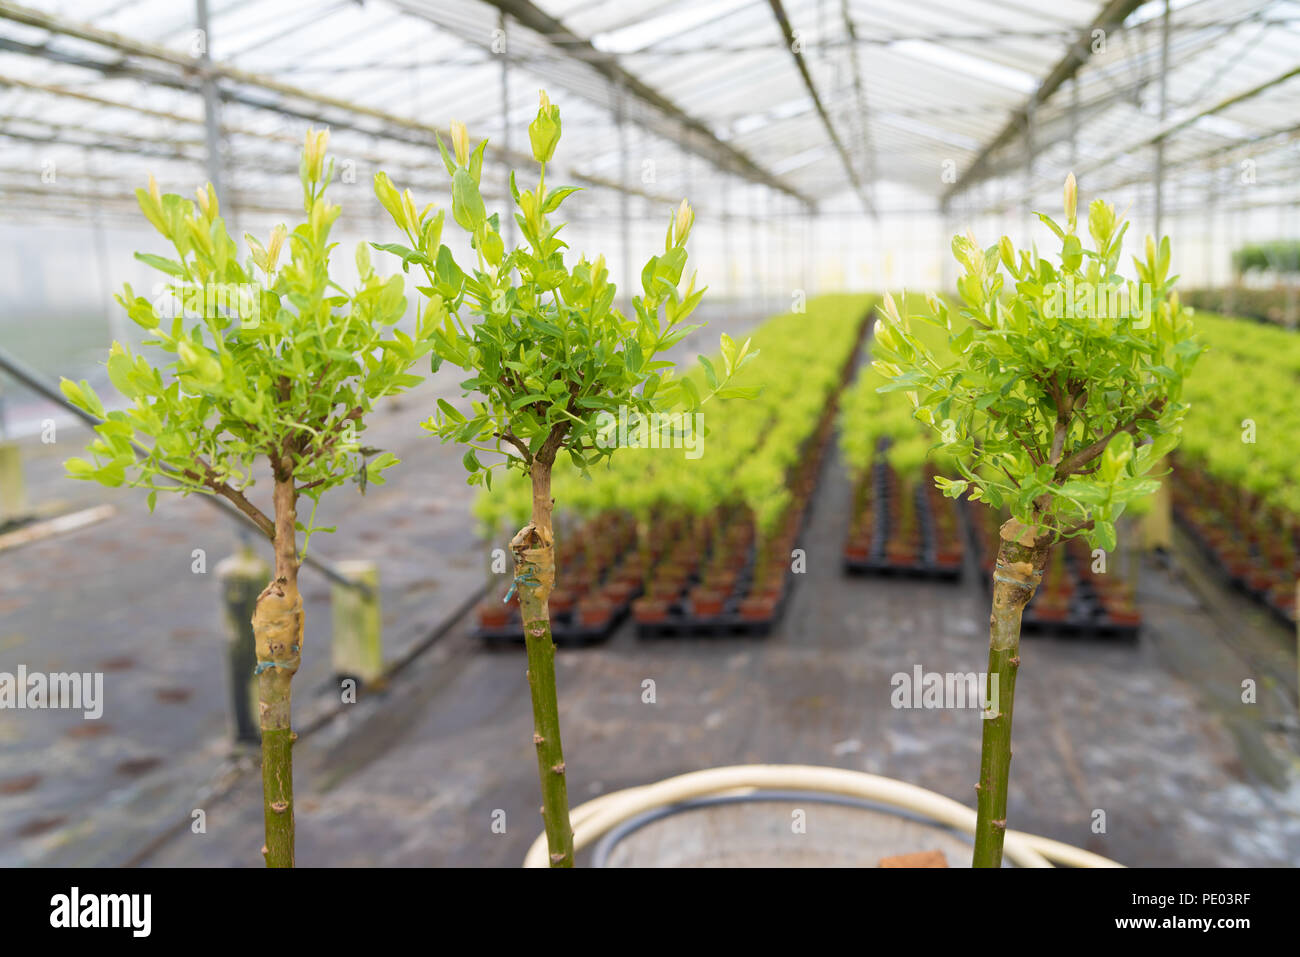 grafting on young willow trees in a greenhouse Stock Photo